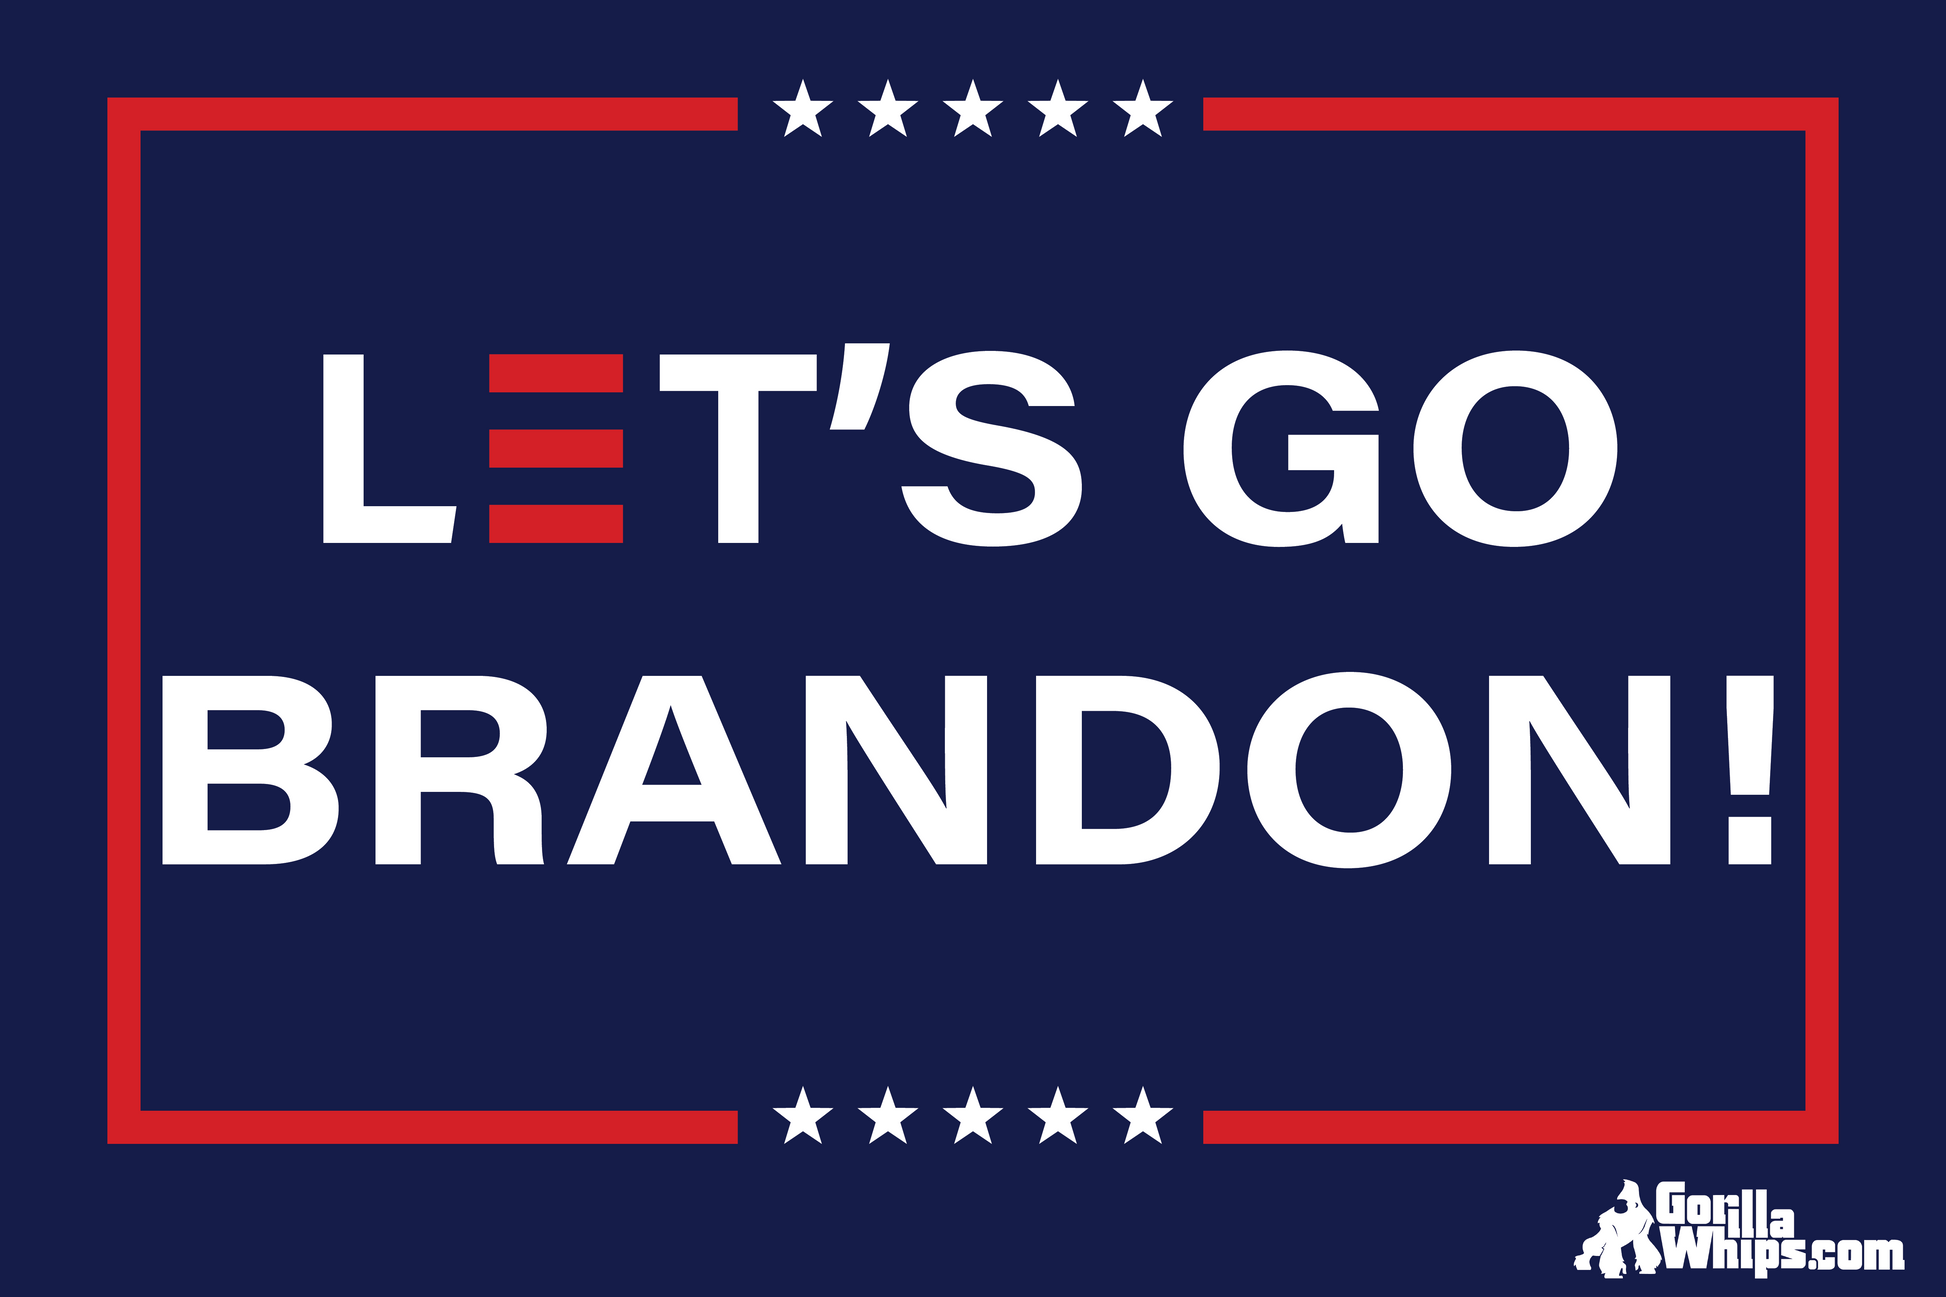 Let's Go Brandon 12" x 18" Flag (NEW USA Made Highest Quality Double Sided Triple Stitched)  